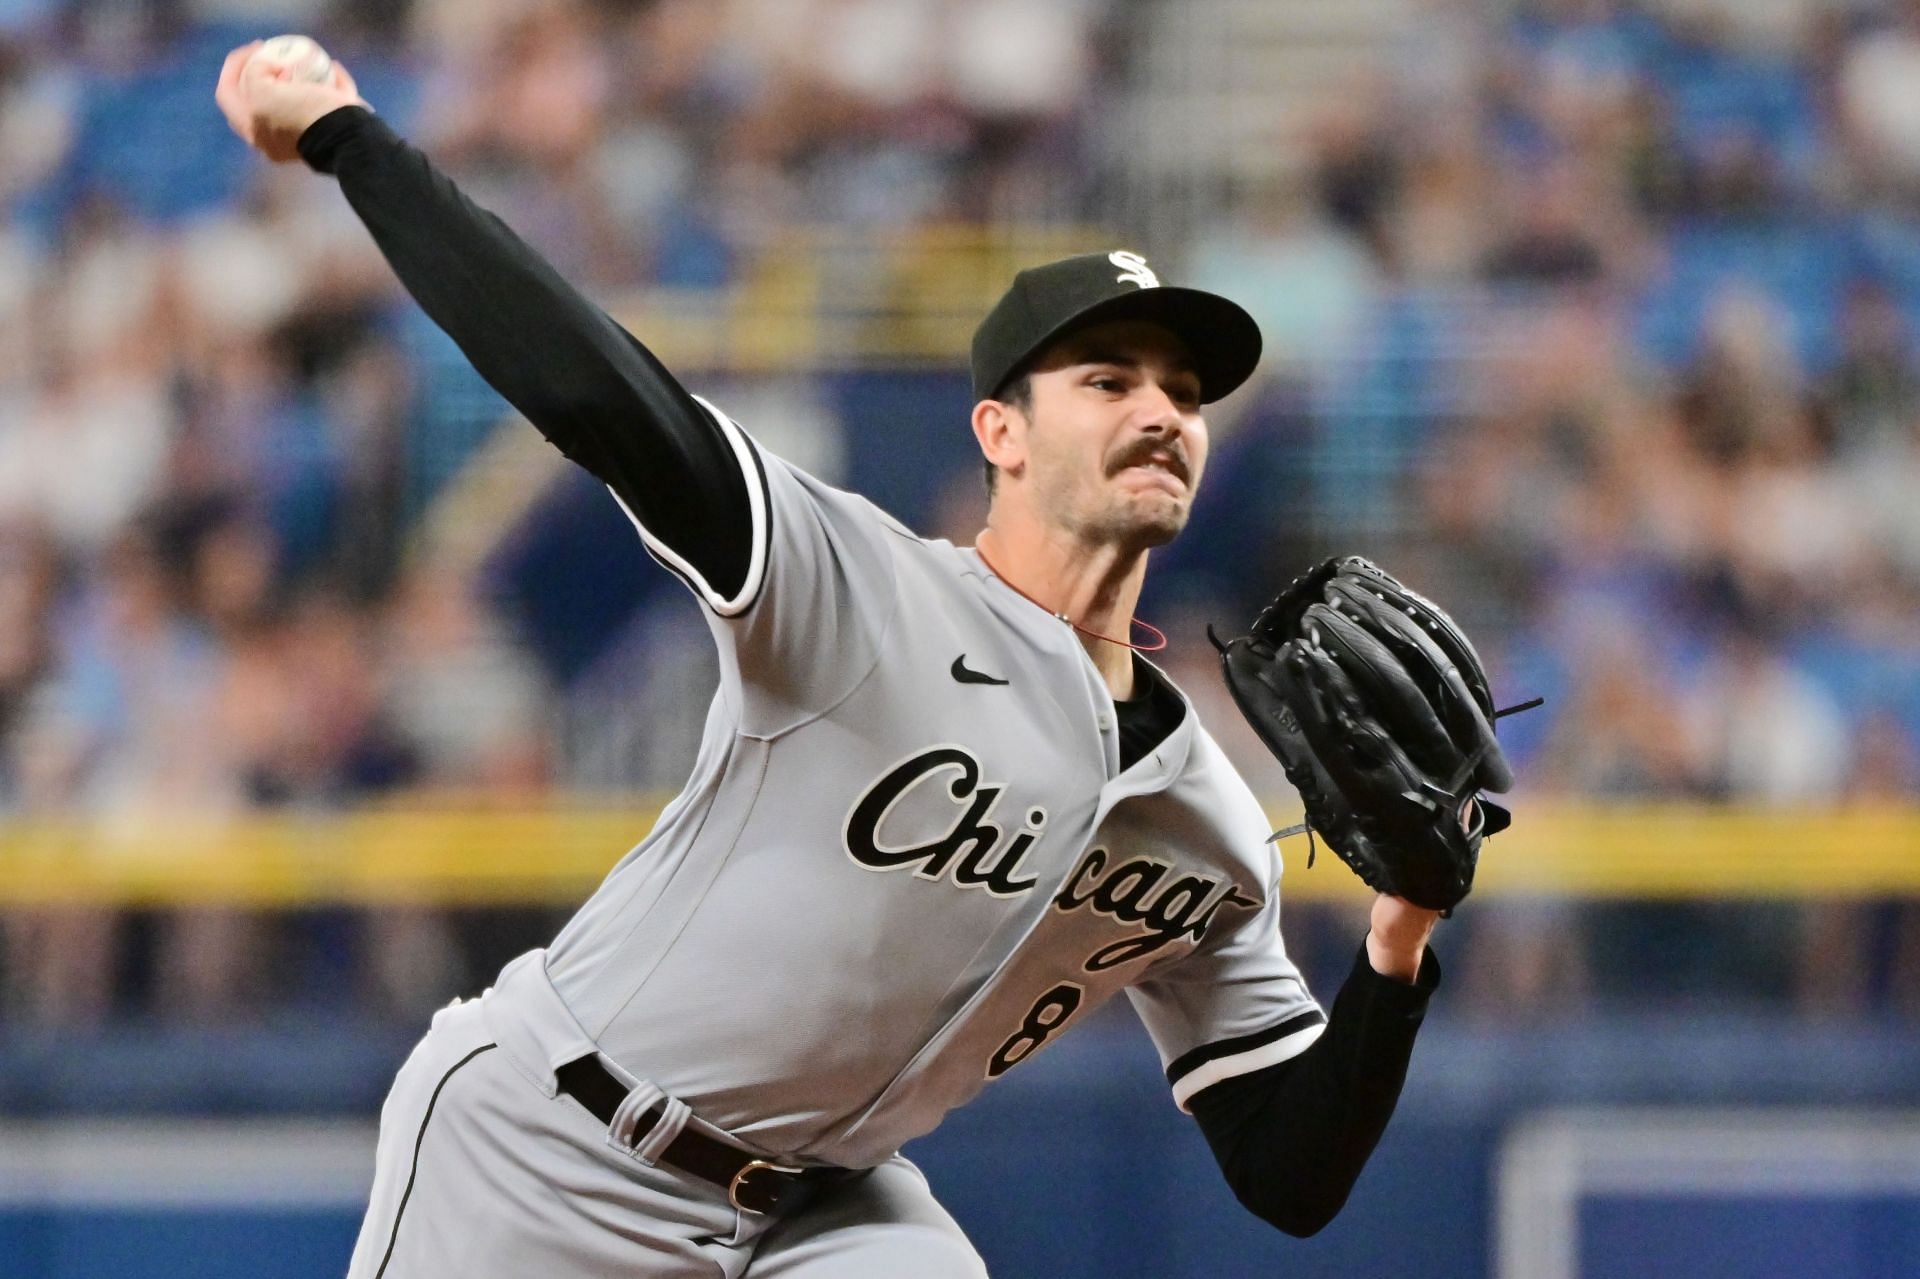 Top pitching prospect Dylan Cease joining Chicago White Sox